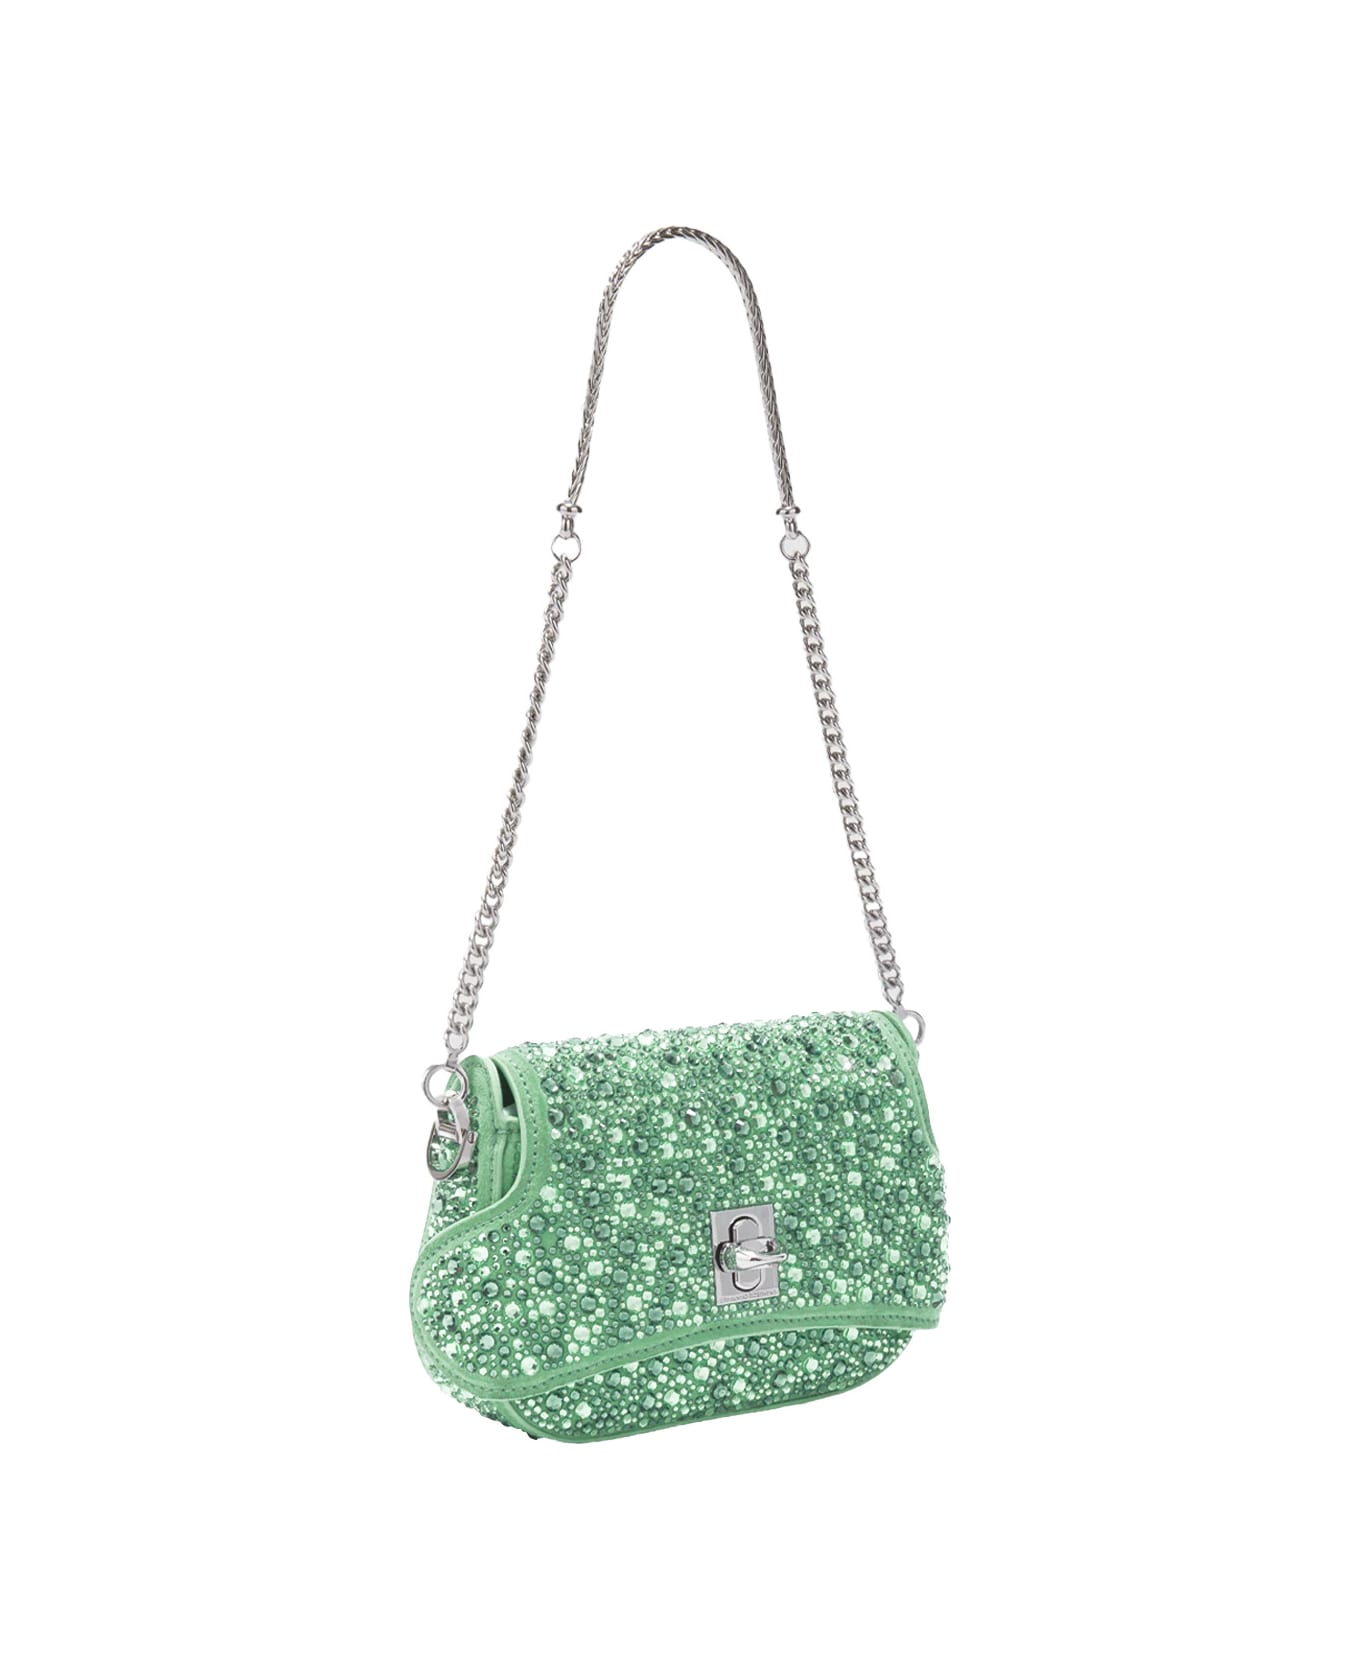 Ermanno Scervino Green Audrey Bag With Crystals - Green